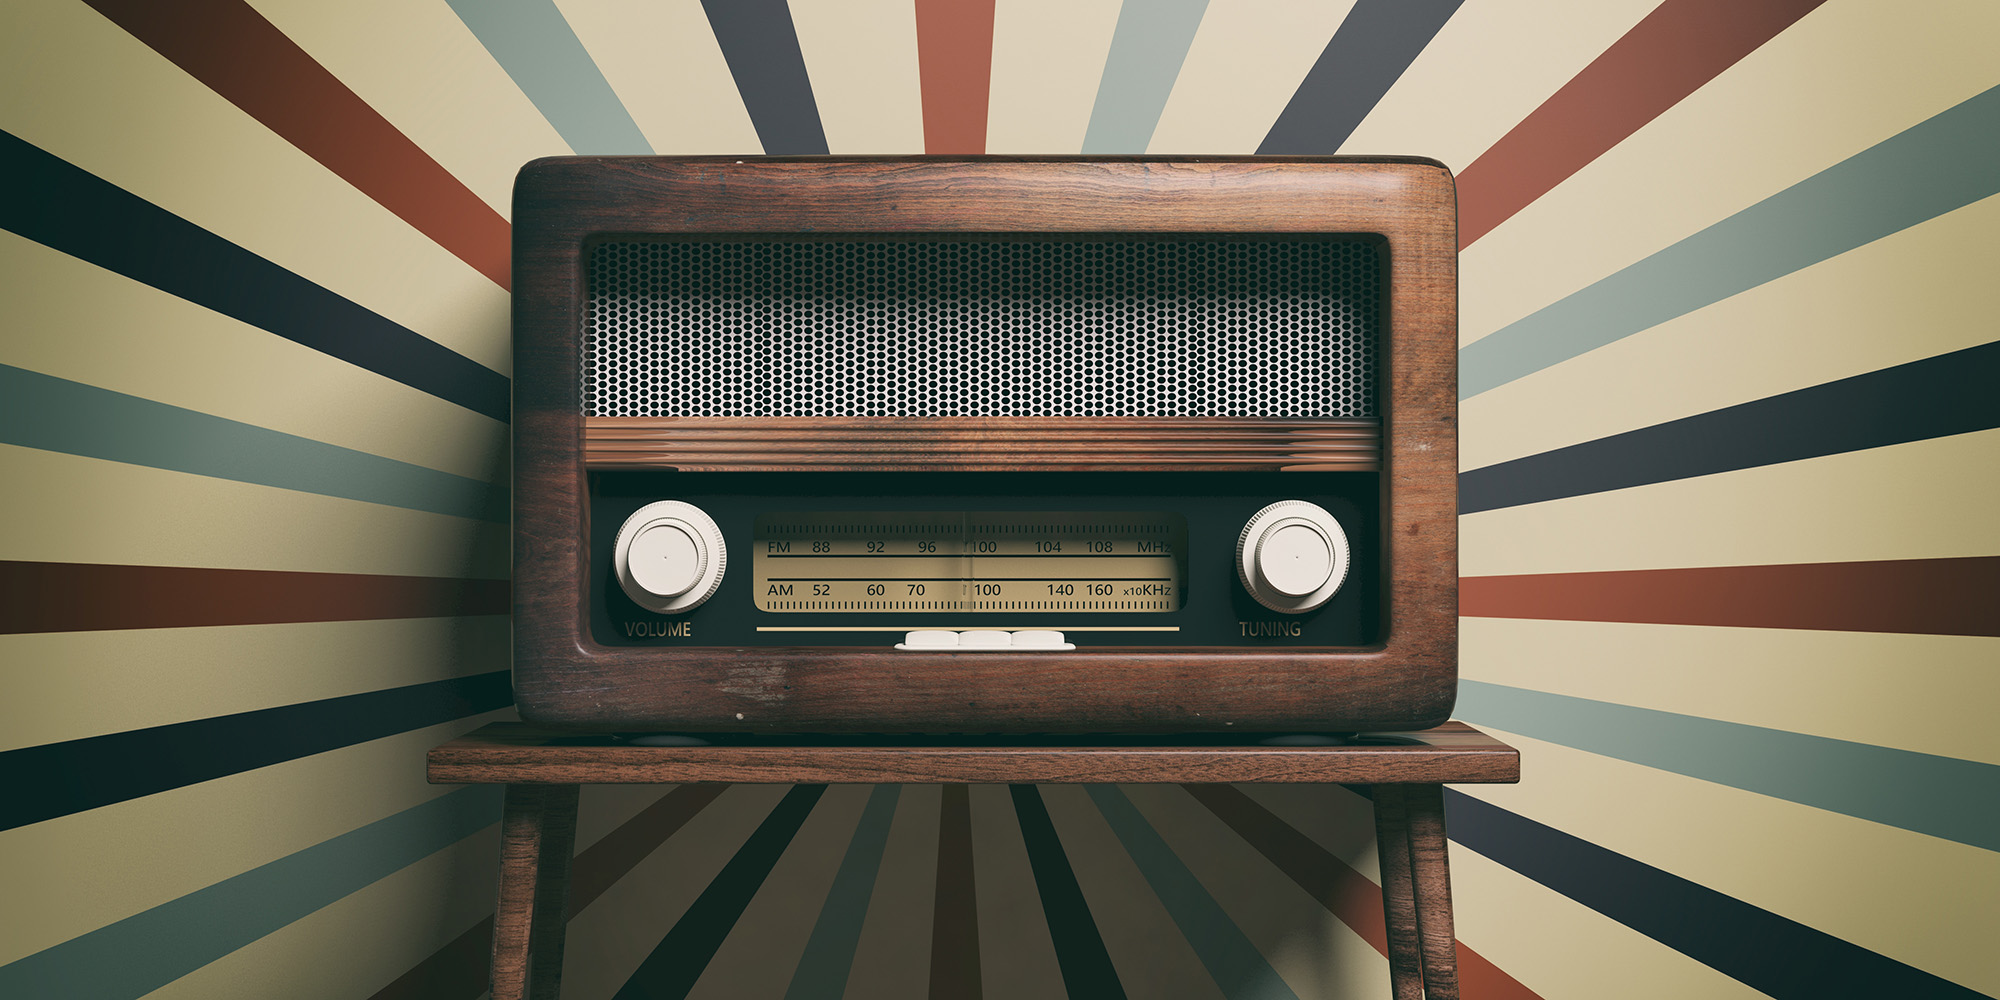 An old radio in front of colorful wallpaper.